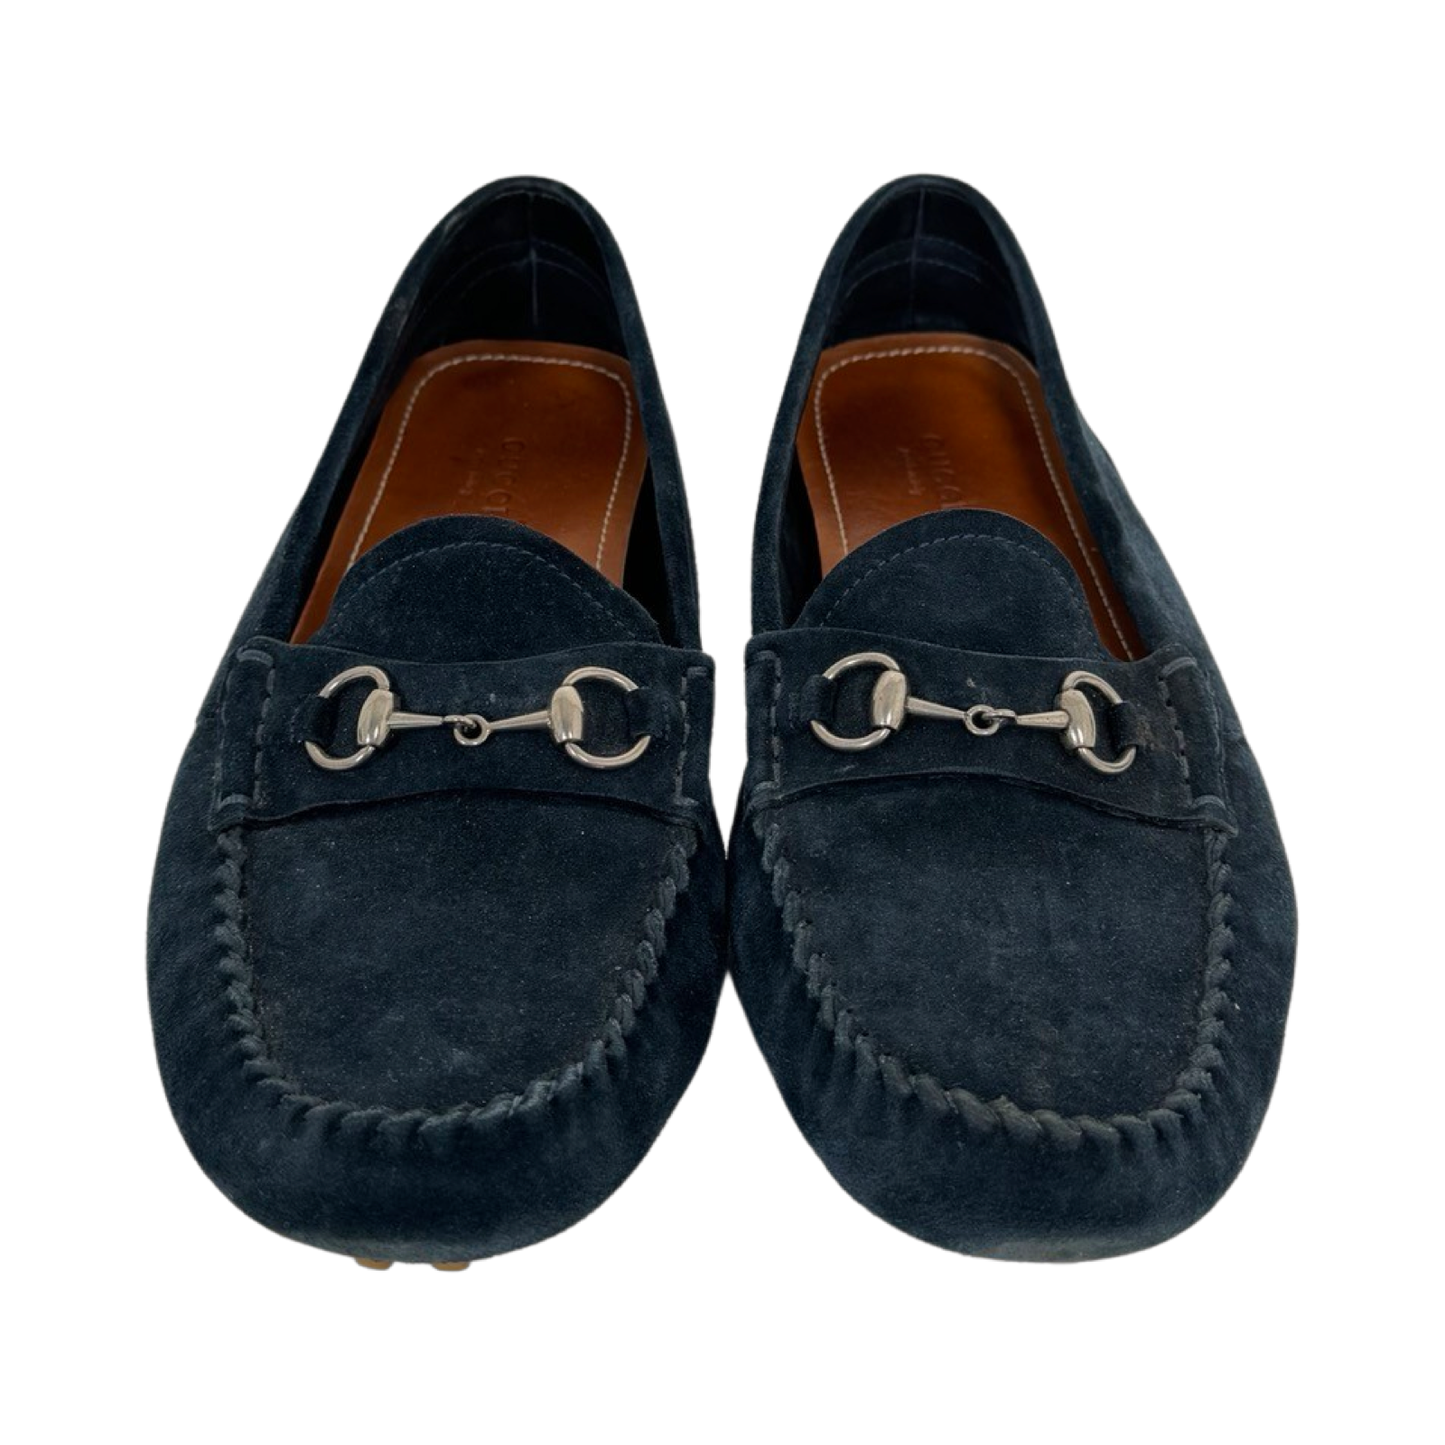 Gucci Suede Loafers (Size 39.5)